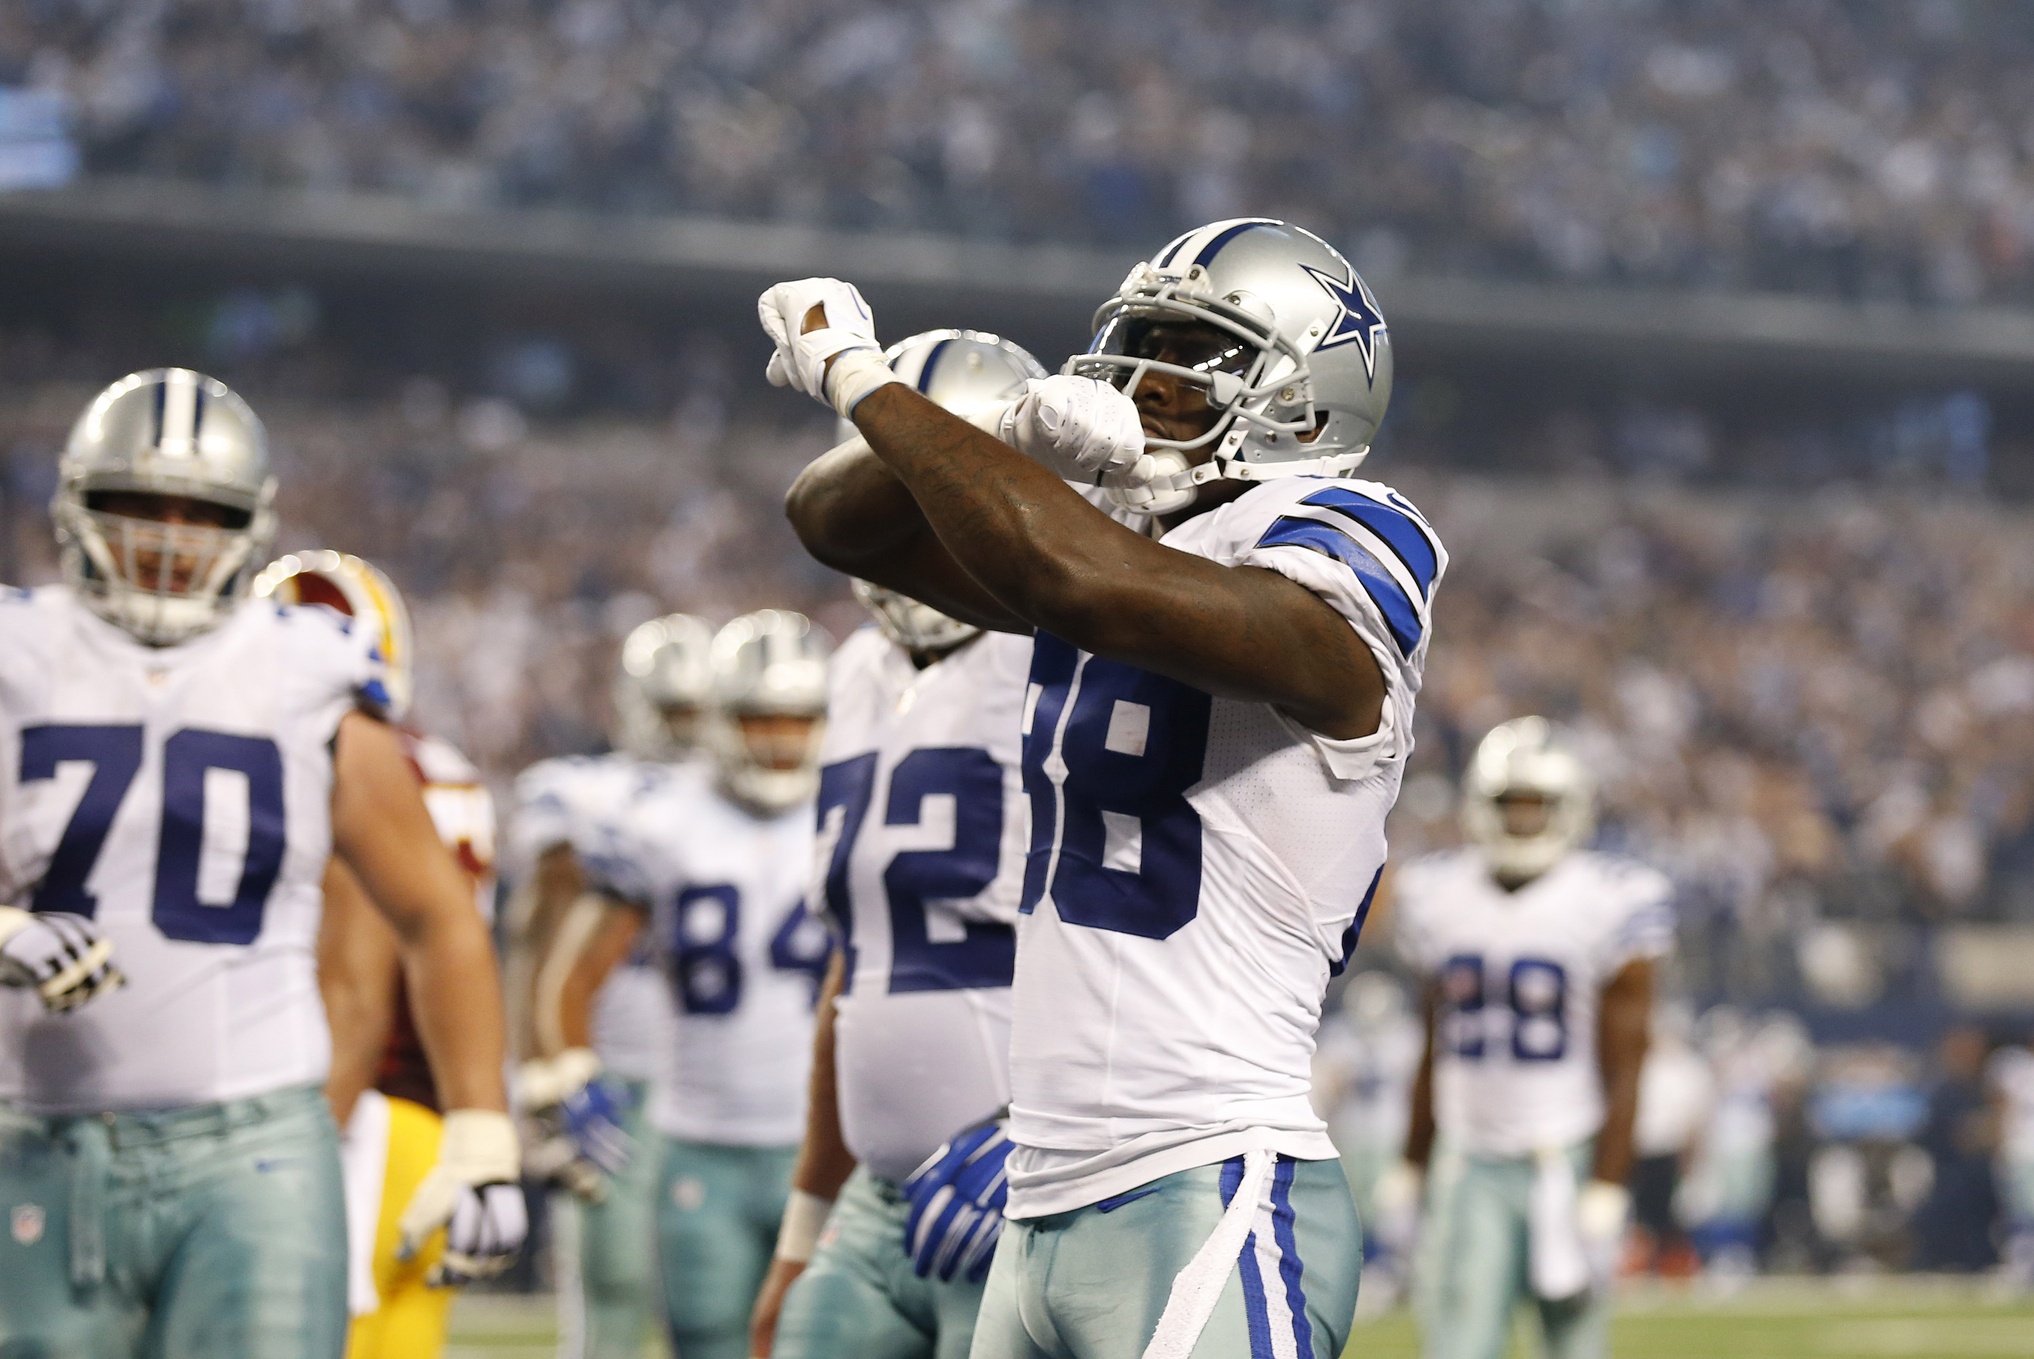 Dez Bryant throws up the "X." (USATSI)